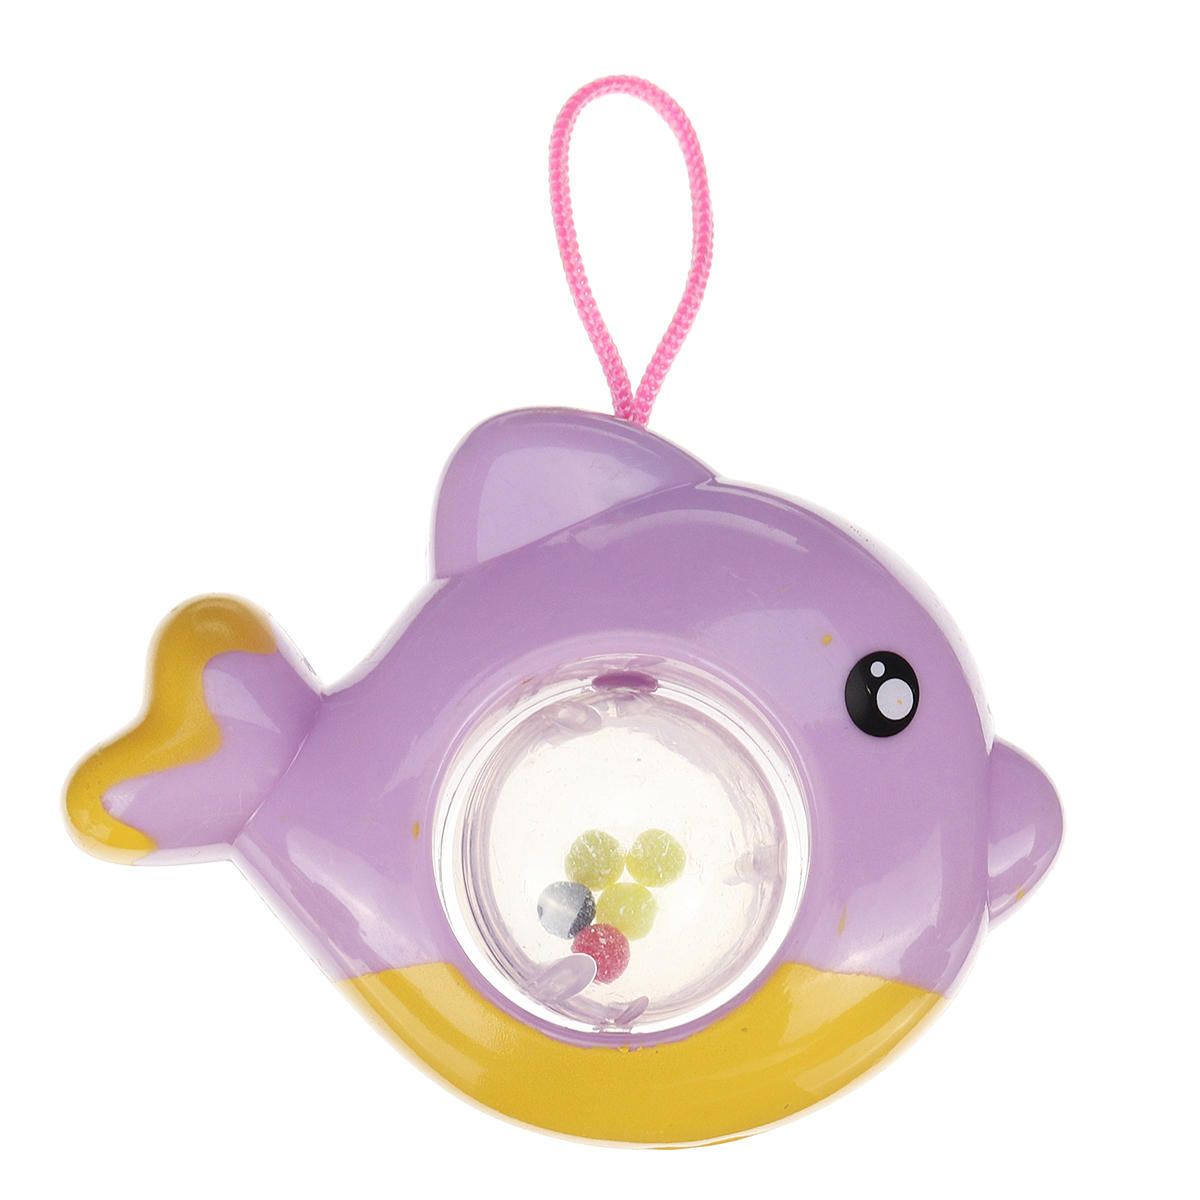 Crib-Mobile-Musical-Bed-Bell-With-Animal-Rattles-Projection-Early-Learning-Toys-0-12-Months-1434065-7